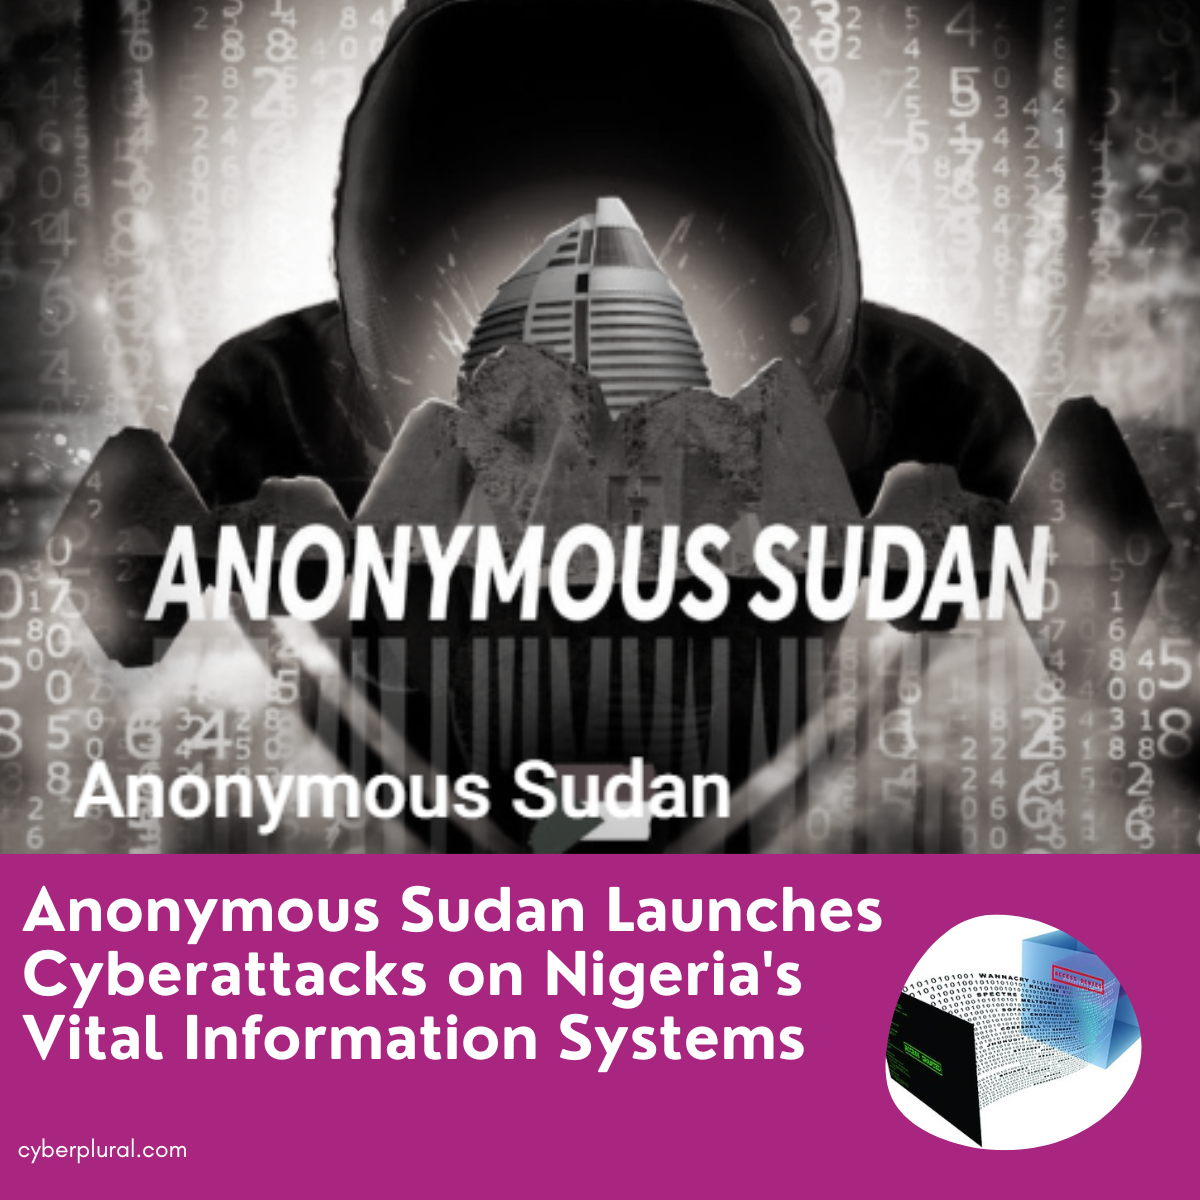 League of Legends Cyberattack: Anonymous Sudan's Claims Responsibility